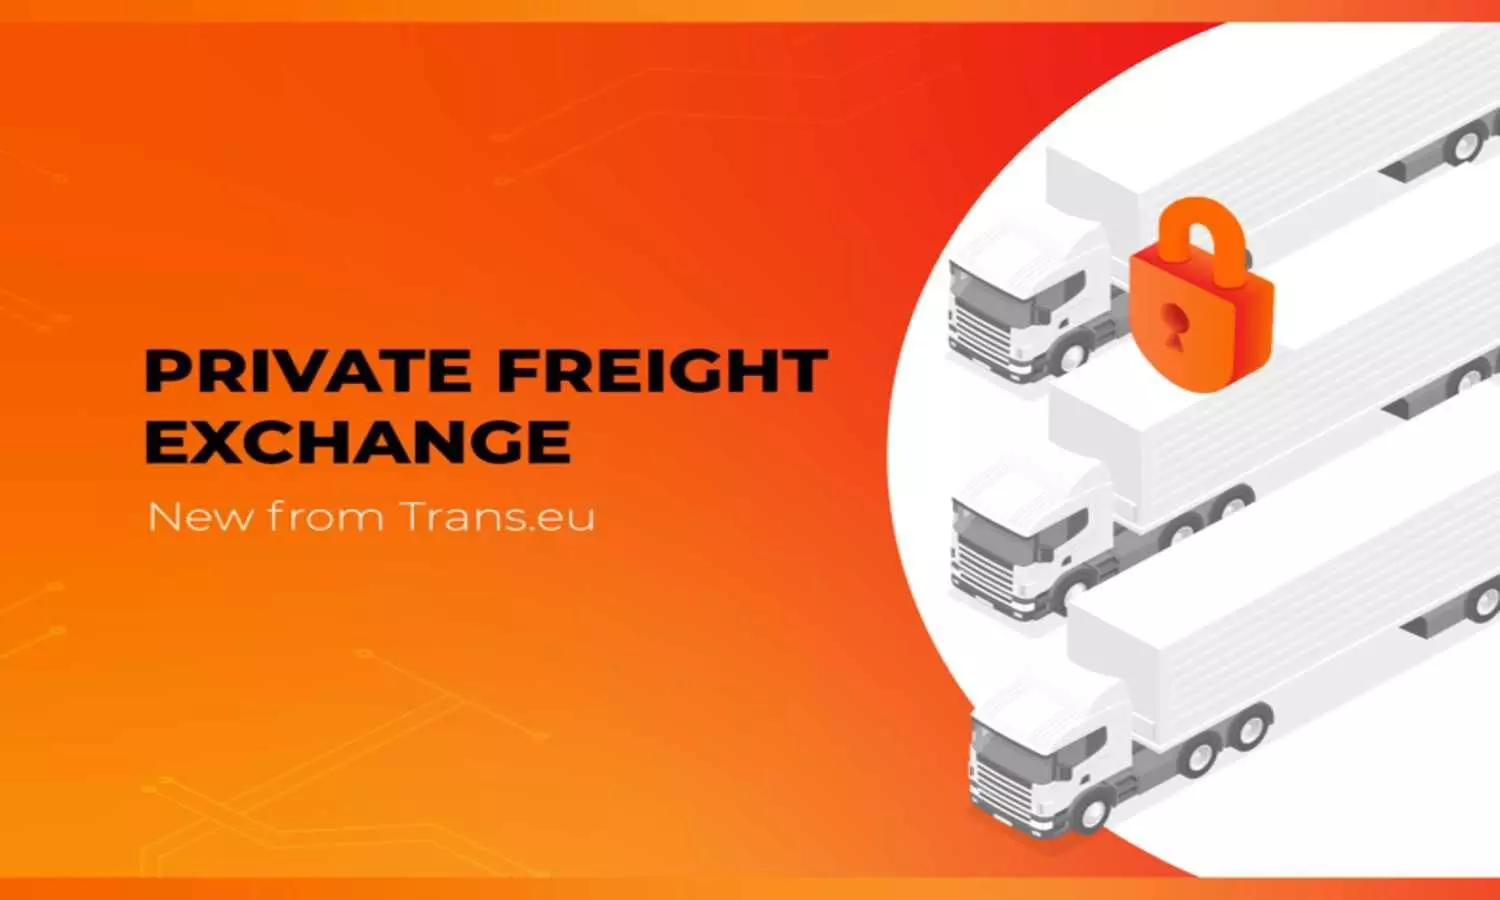 Trans.eu can expand any number of trusted hauliers to a clients Private Freight Exchange database